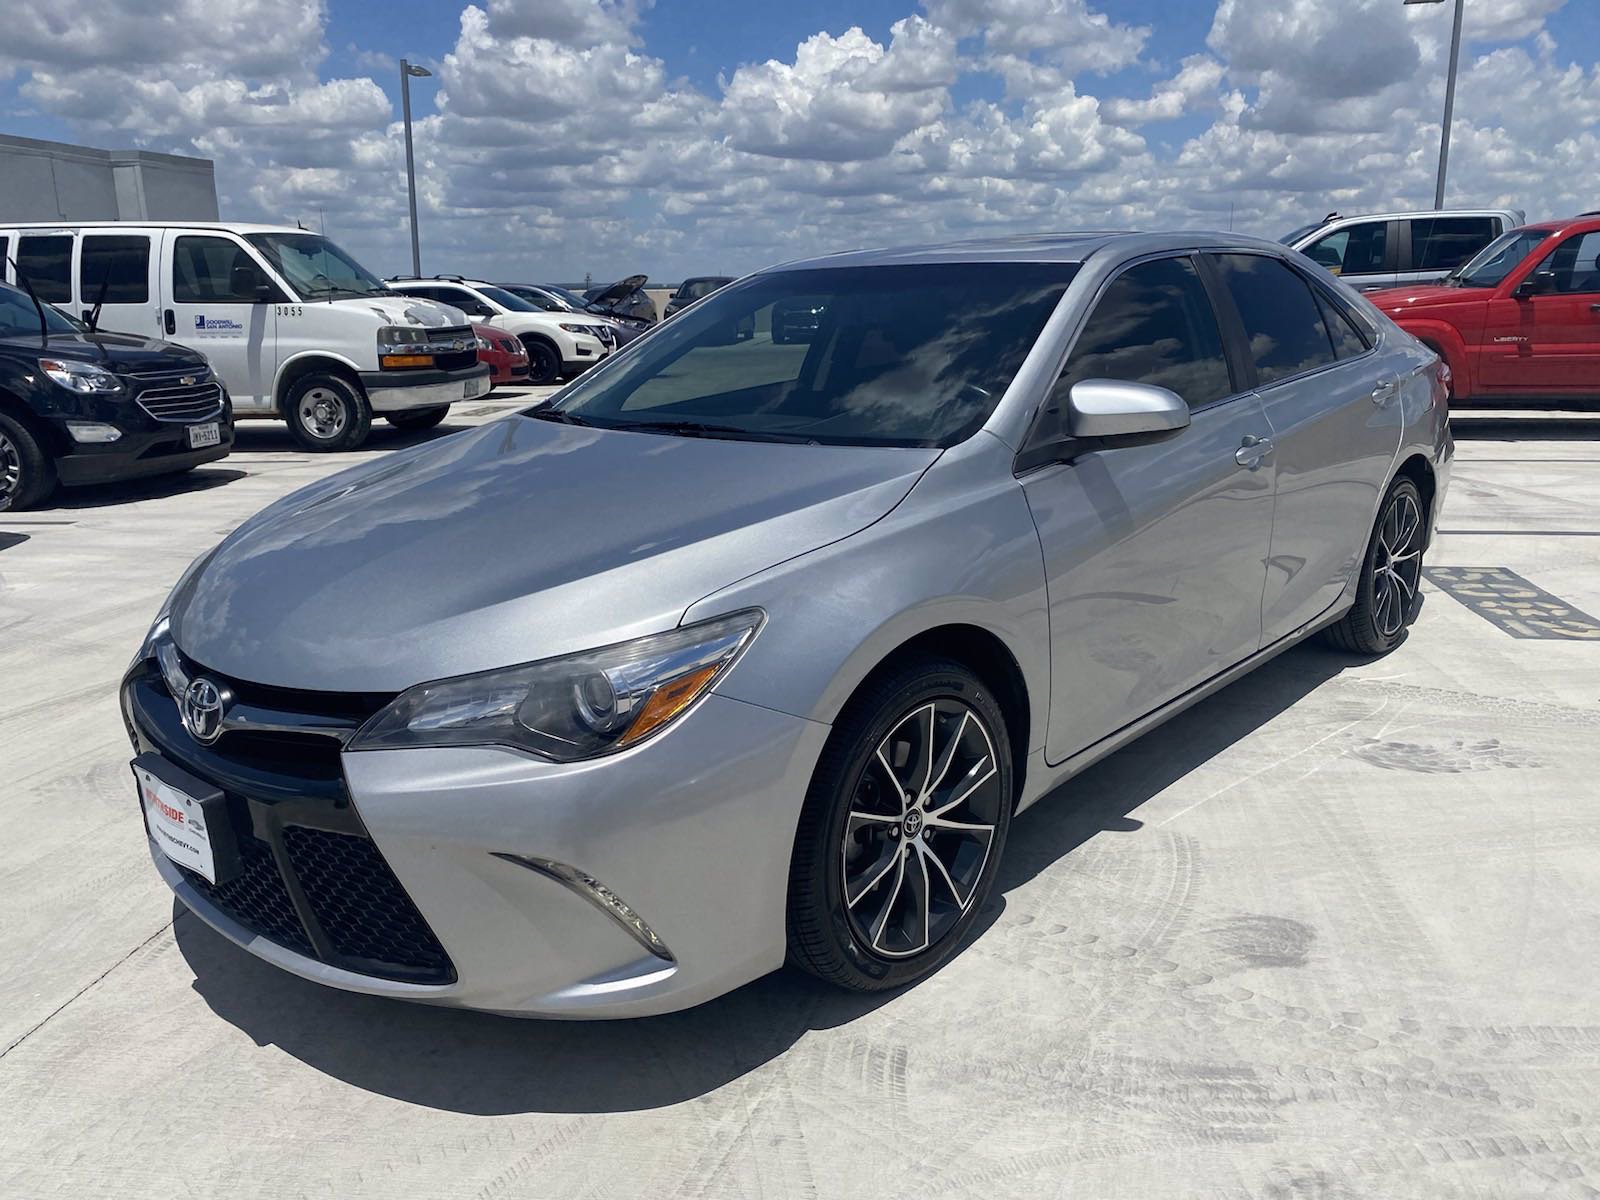 Pre-Owned 2015 Toyota Camry XSE 4dr Car in San Antonio | Northside Honda